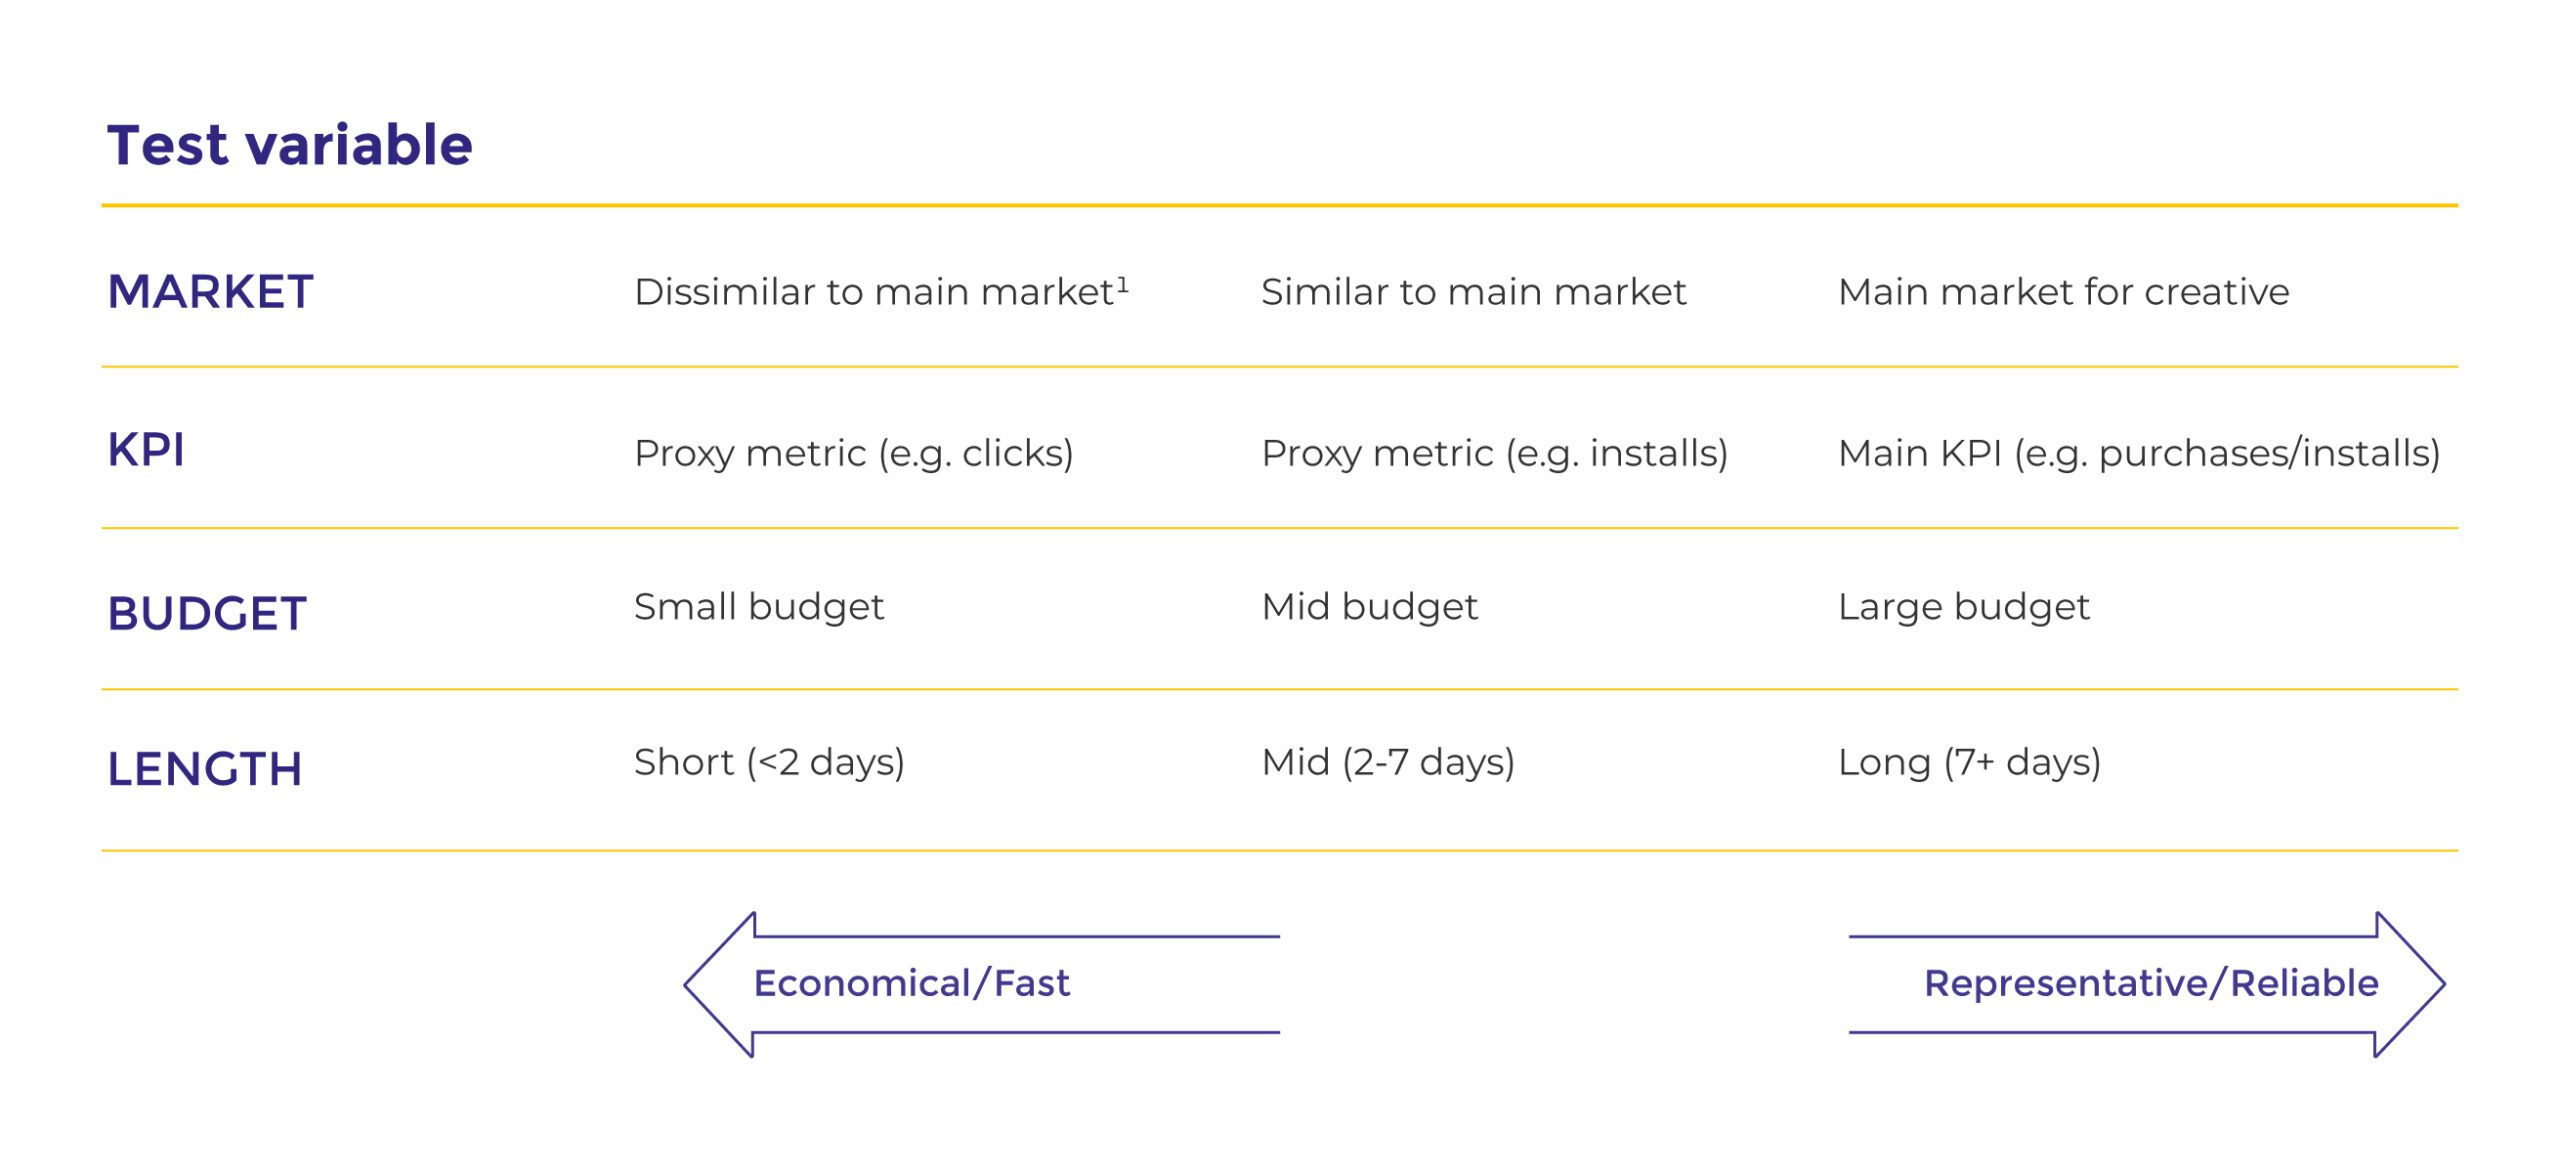 A table from Admiral Media on creative testing for Meta, displaying test variables in different categories. The table has four rows labeled MARKET, KPI, BUDGET, and LENGTH, each with three columns for different options. For MARKET: 'Dissimilar to main market,' 'Similar to main market,' and 'Main market for creative.' For KPI: 'Proxy metric (e.g. clicks),' 'Proxy metric (e.g. installs),' and 'Main KPI (e.g. purchases/installs).' For BUDGET: 'Small budget,' 'Mid budget,' and 'Large budget.' For LENGTH: 'Short (<2 days),' 'Mid (2-7 days),' and 'Long (7+ days).' Arrows point from left to right, starting with 'Economical/Fast' and ending with 'Representative/Reliable,' indicating a spectrum of testing strategies from quick and cost-effective to comprehensive and trustworthy 